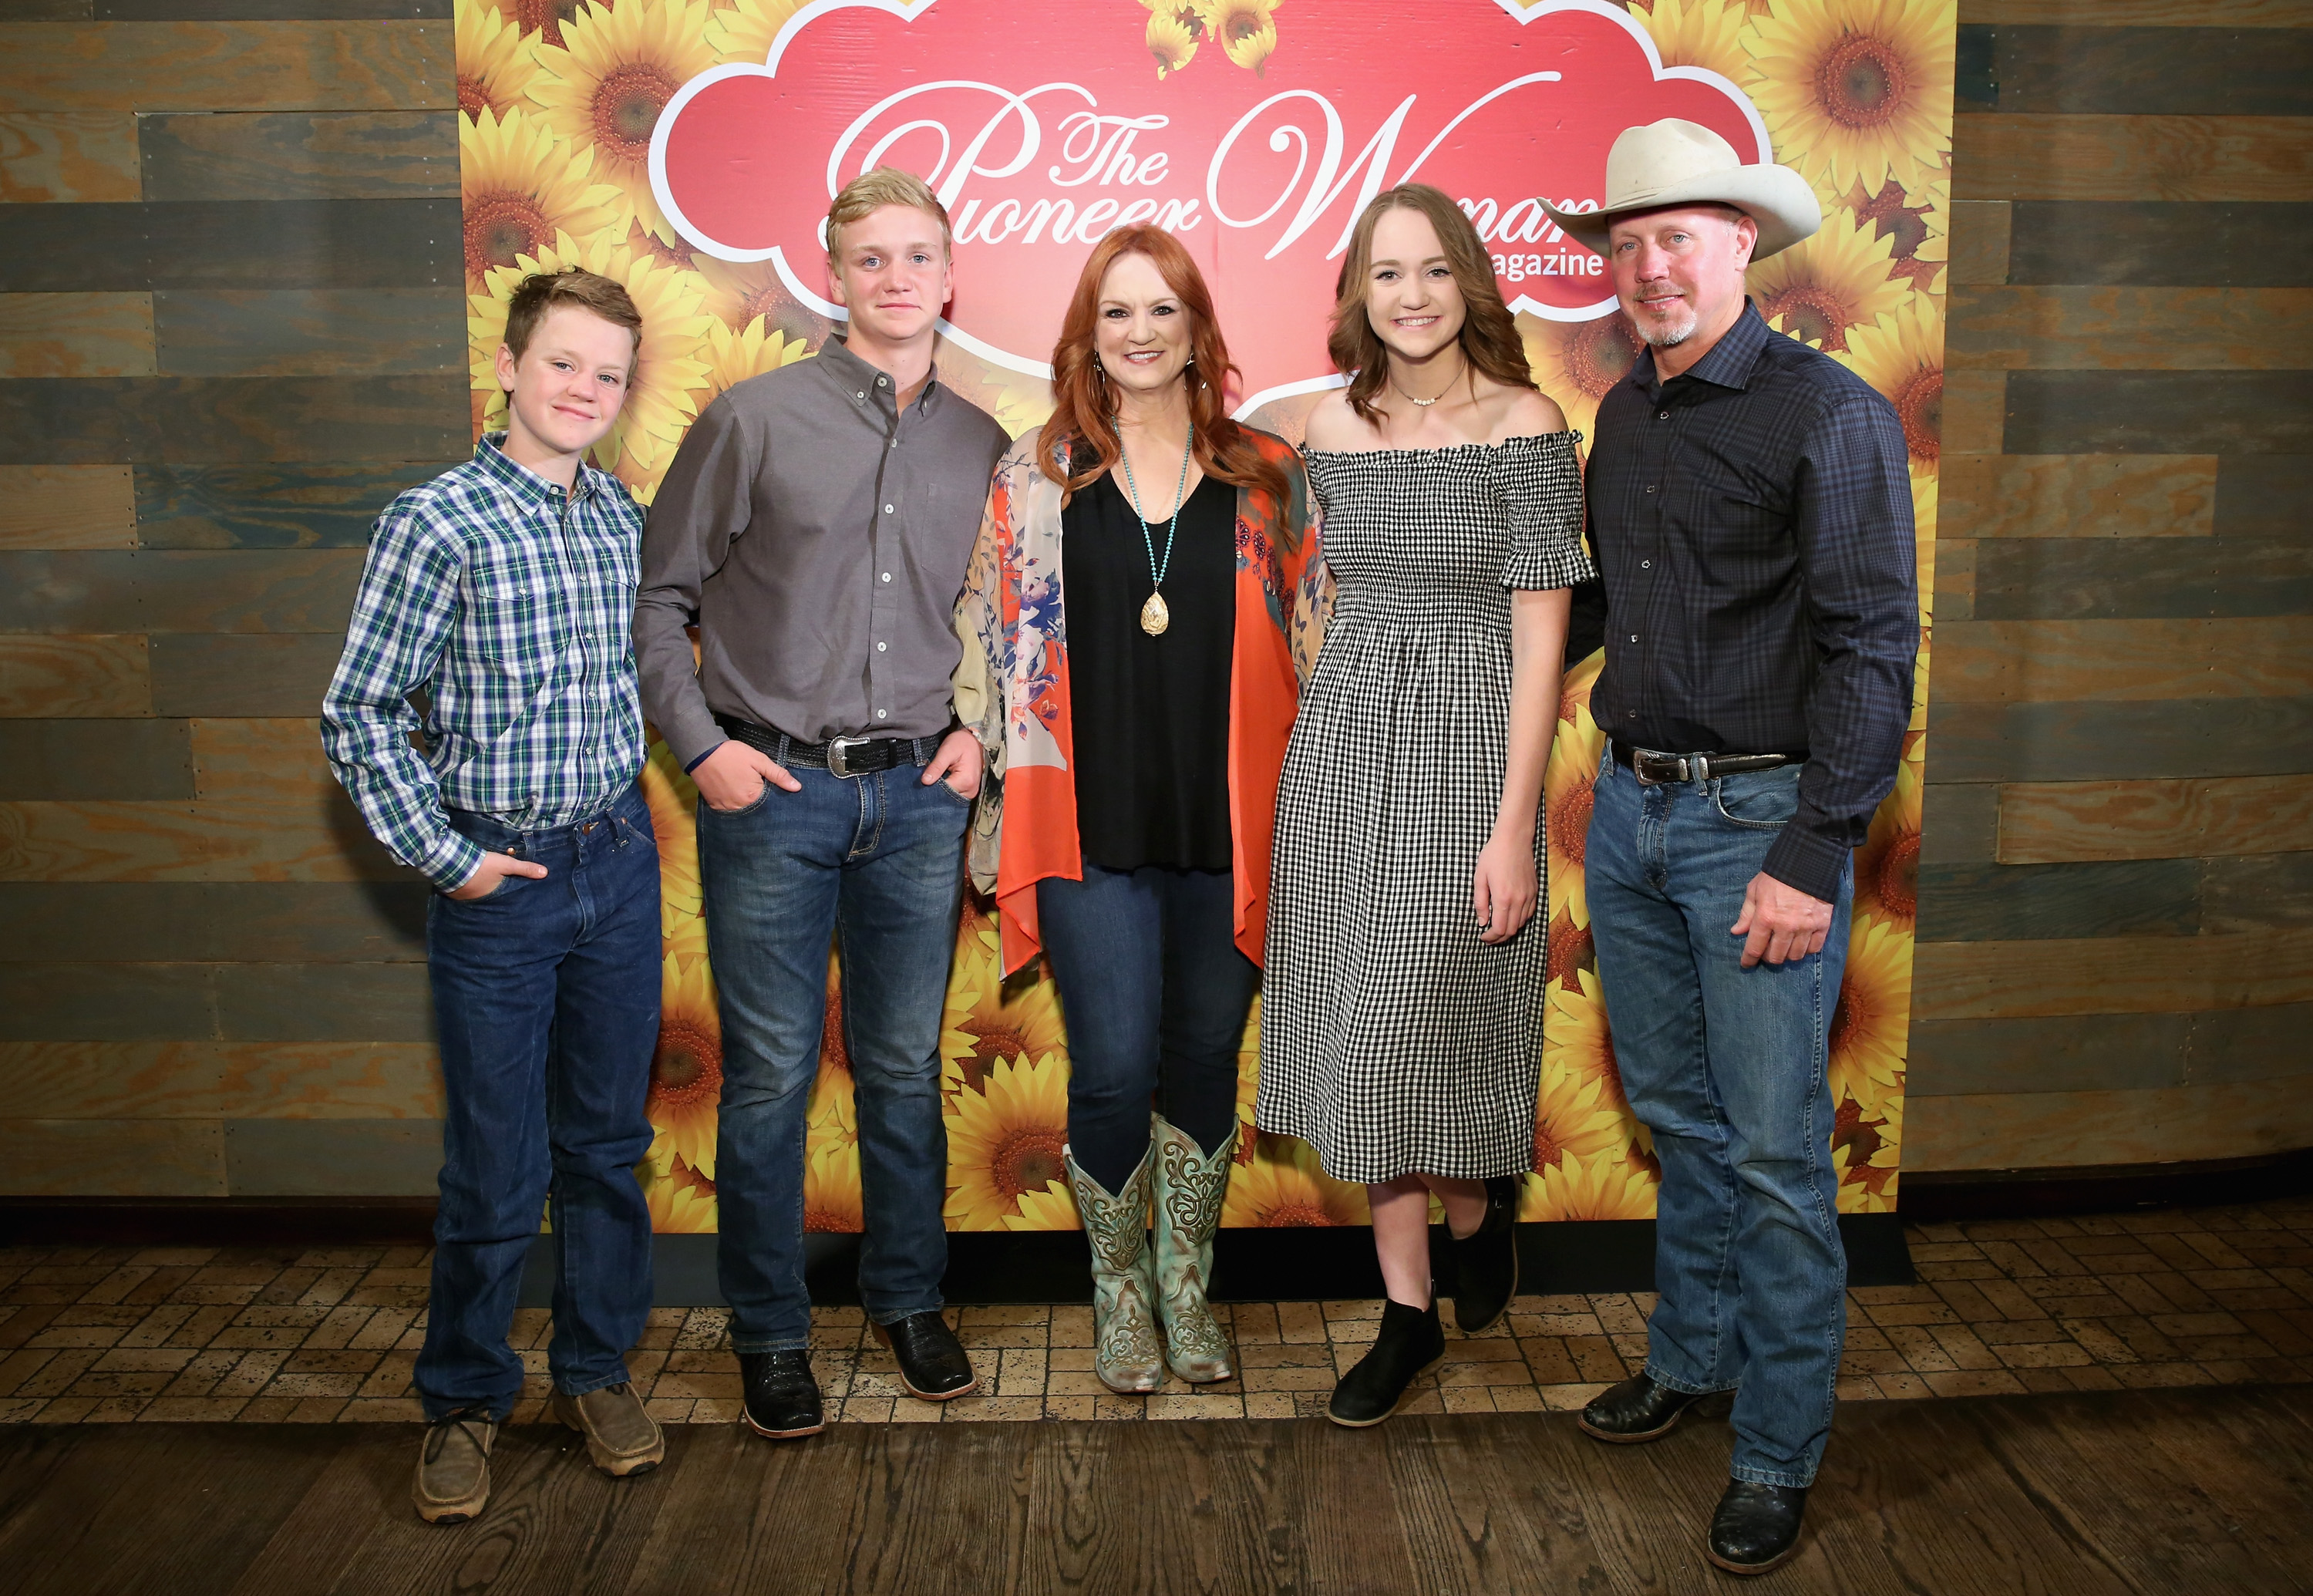 The Pioneer Woman Ree Drummond poses with her family for The Pioneer Woman magazine event. 